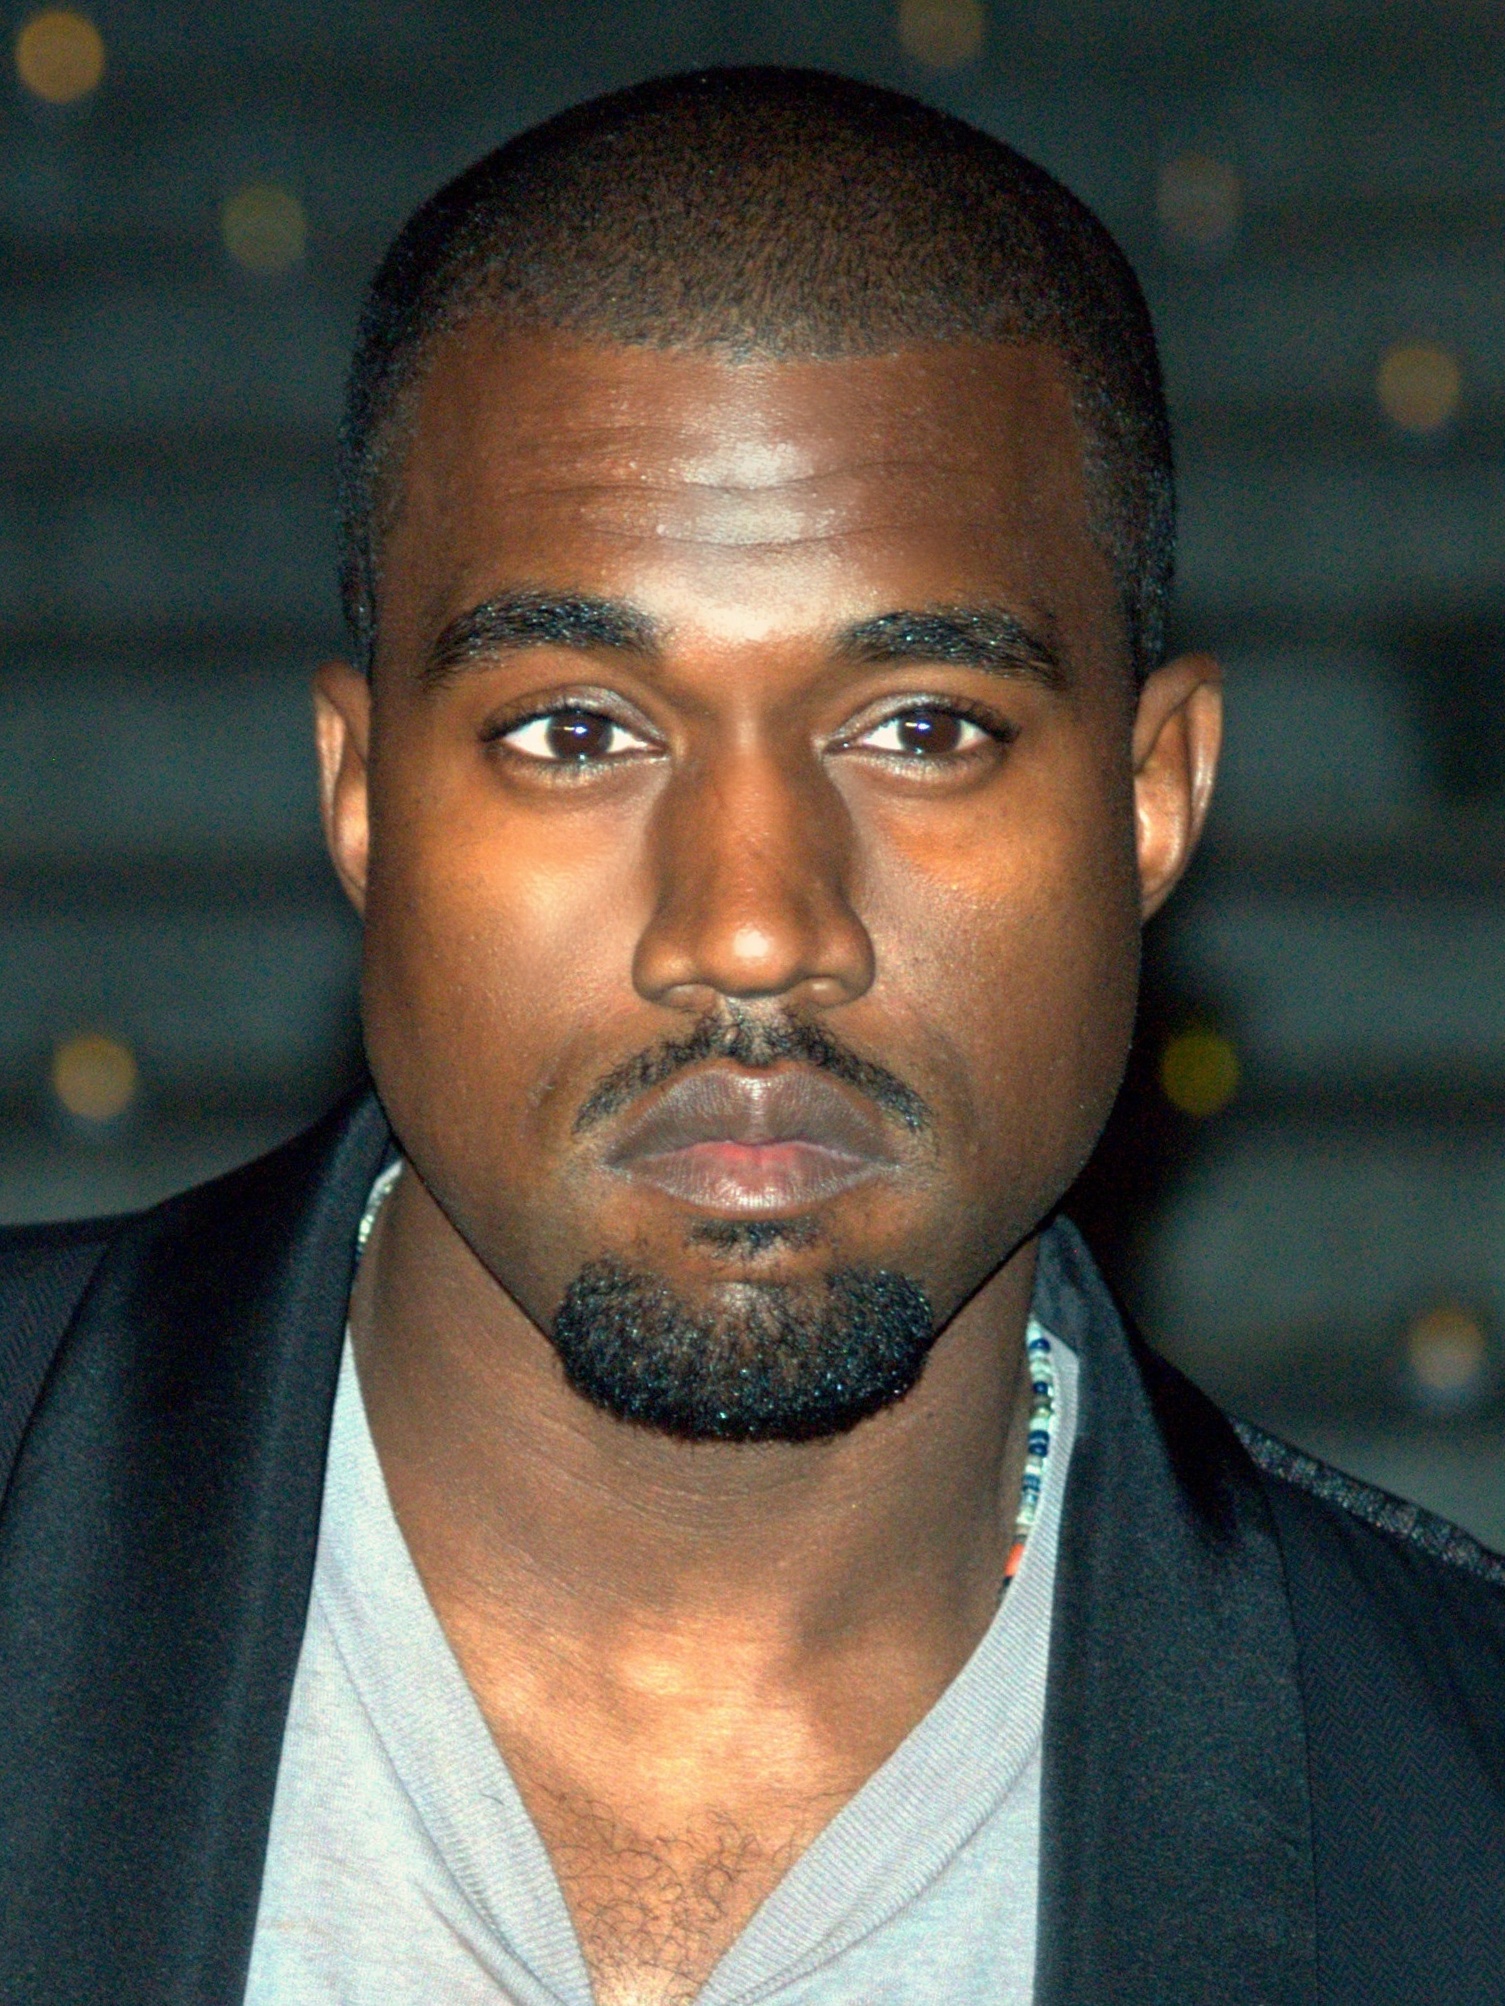 kanye-west’s-twitter-and-instagram-blocked-due-to-offensive-material